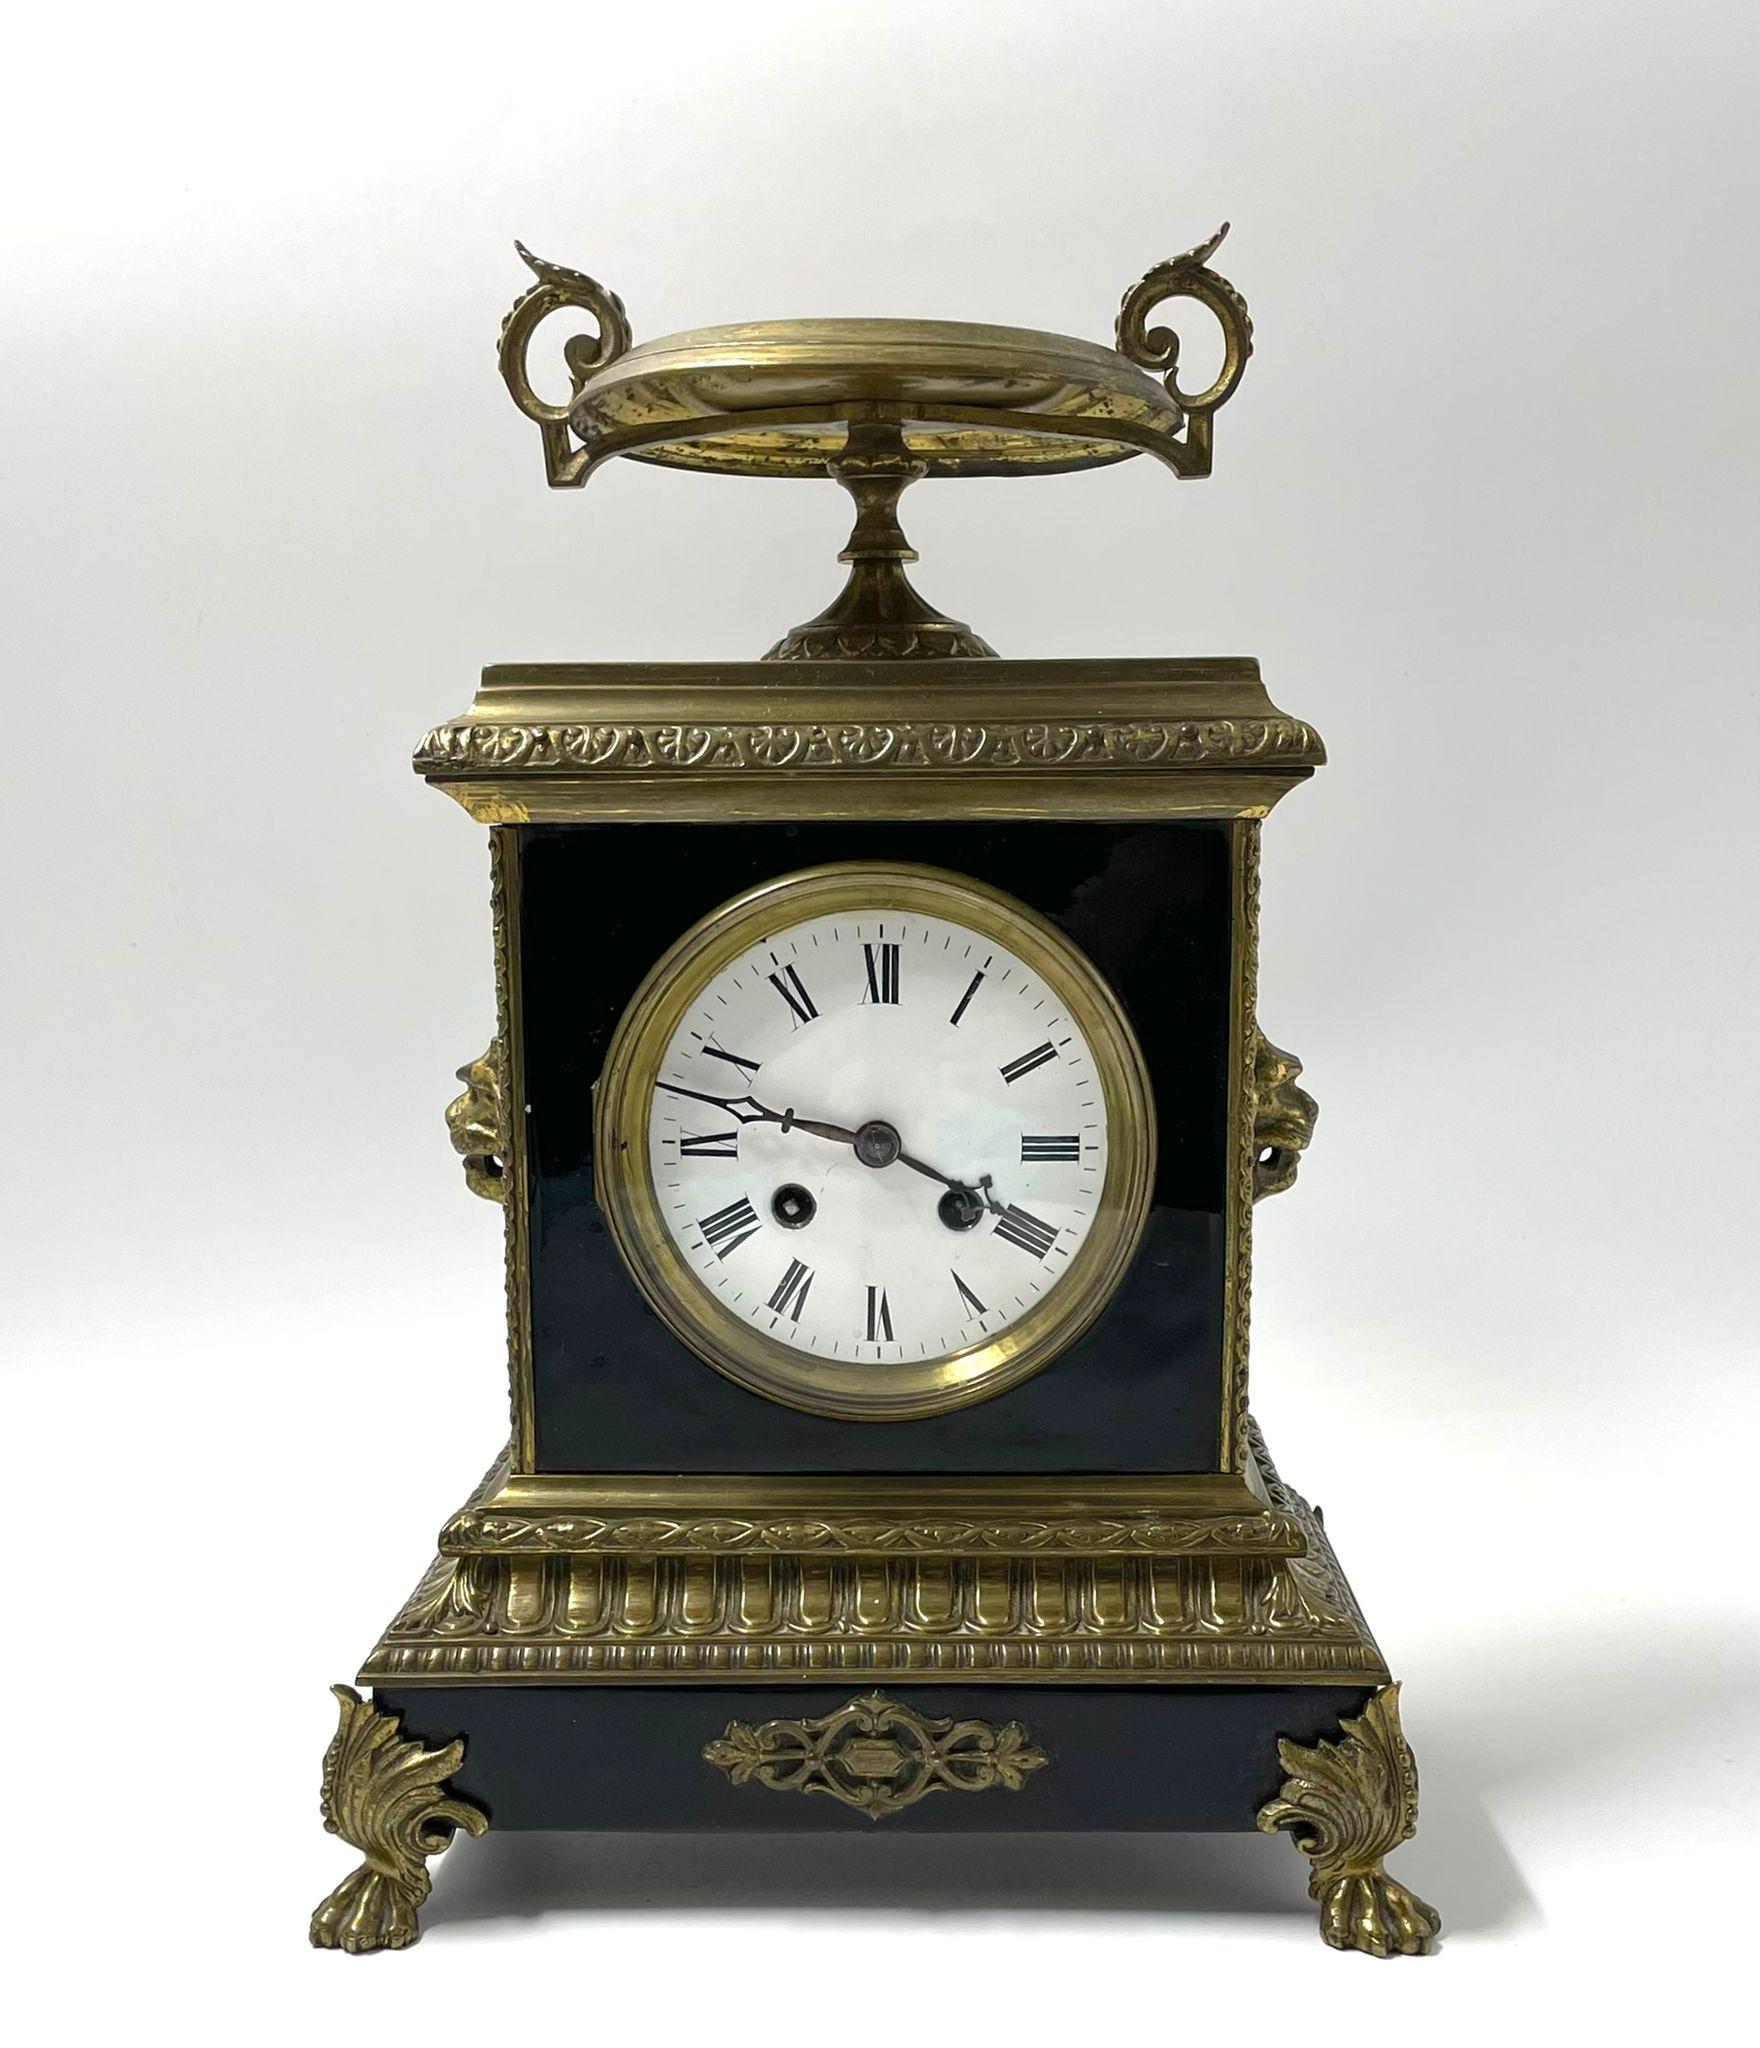 A Handsome 19th century, French Napoleon III mantle Clock of fine quality.
Black enamel & Gilt bronze case , lion masks to the sides sitting on claw feet . The clock and striking bell work perfectly , supplied with Key .
Case in good, antique